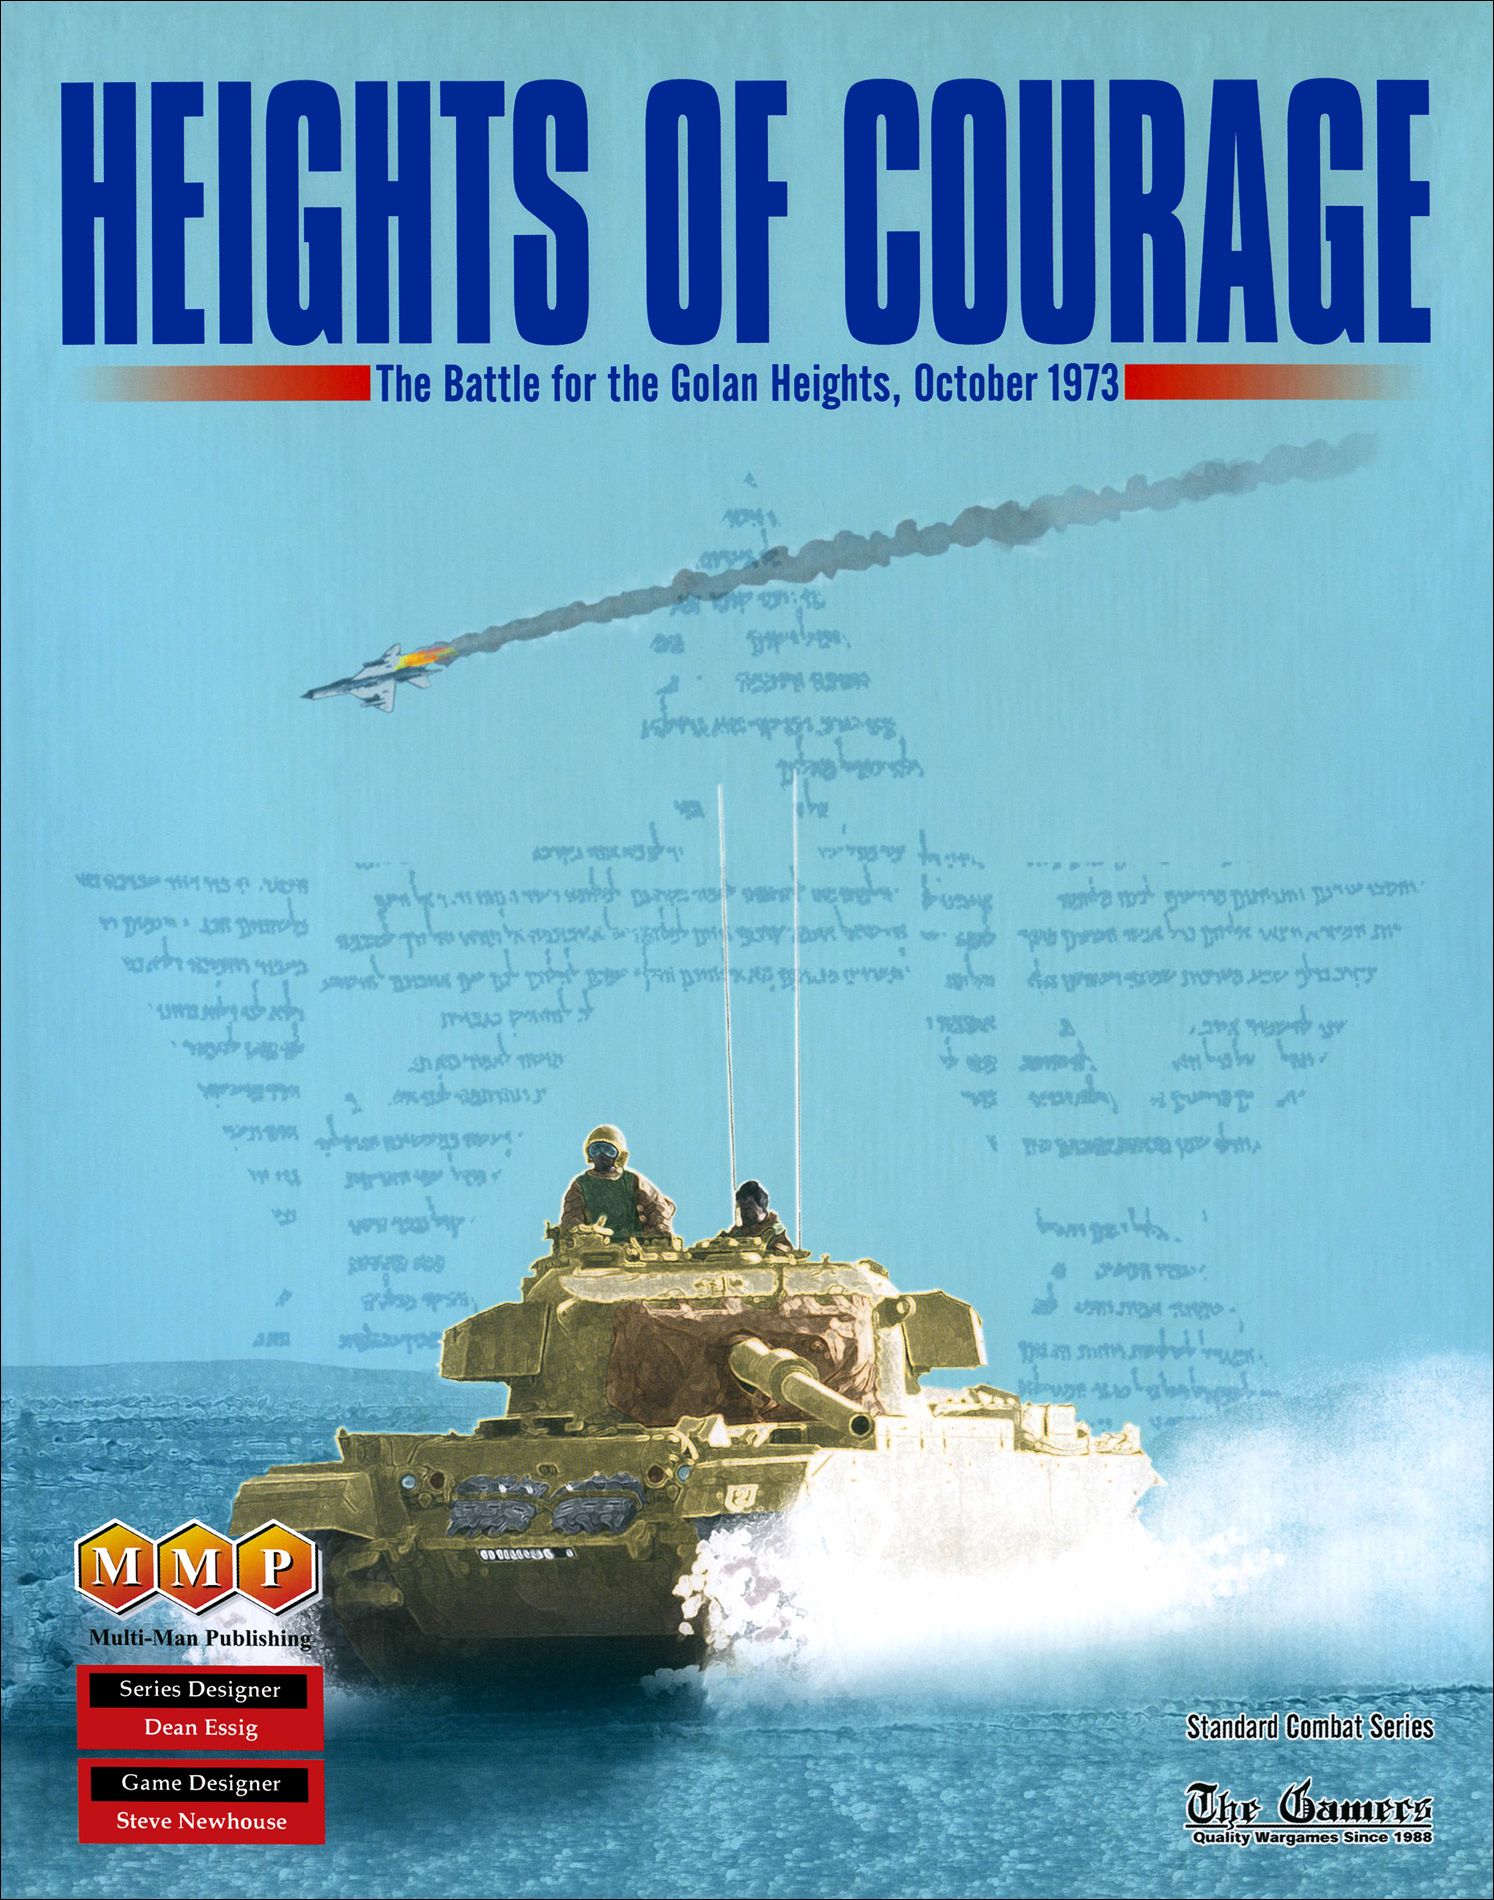 Heights of Courage: The Battle for the Golan Heights, October 1973